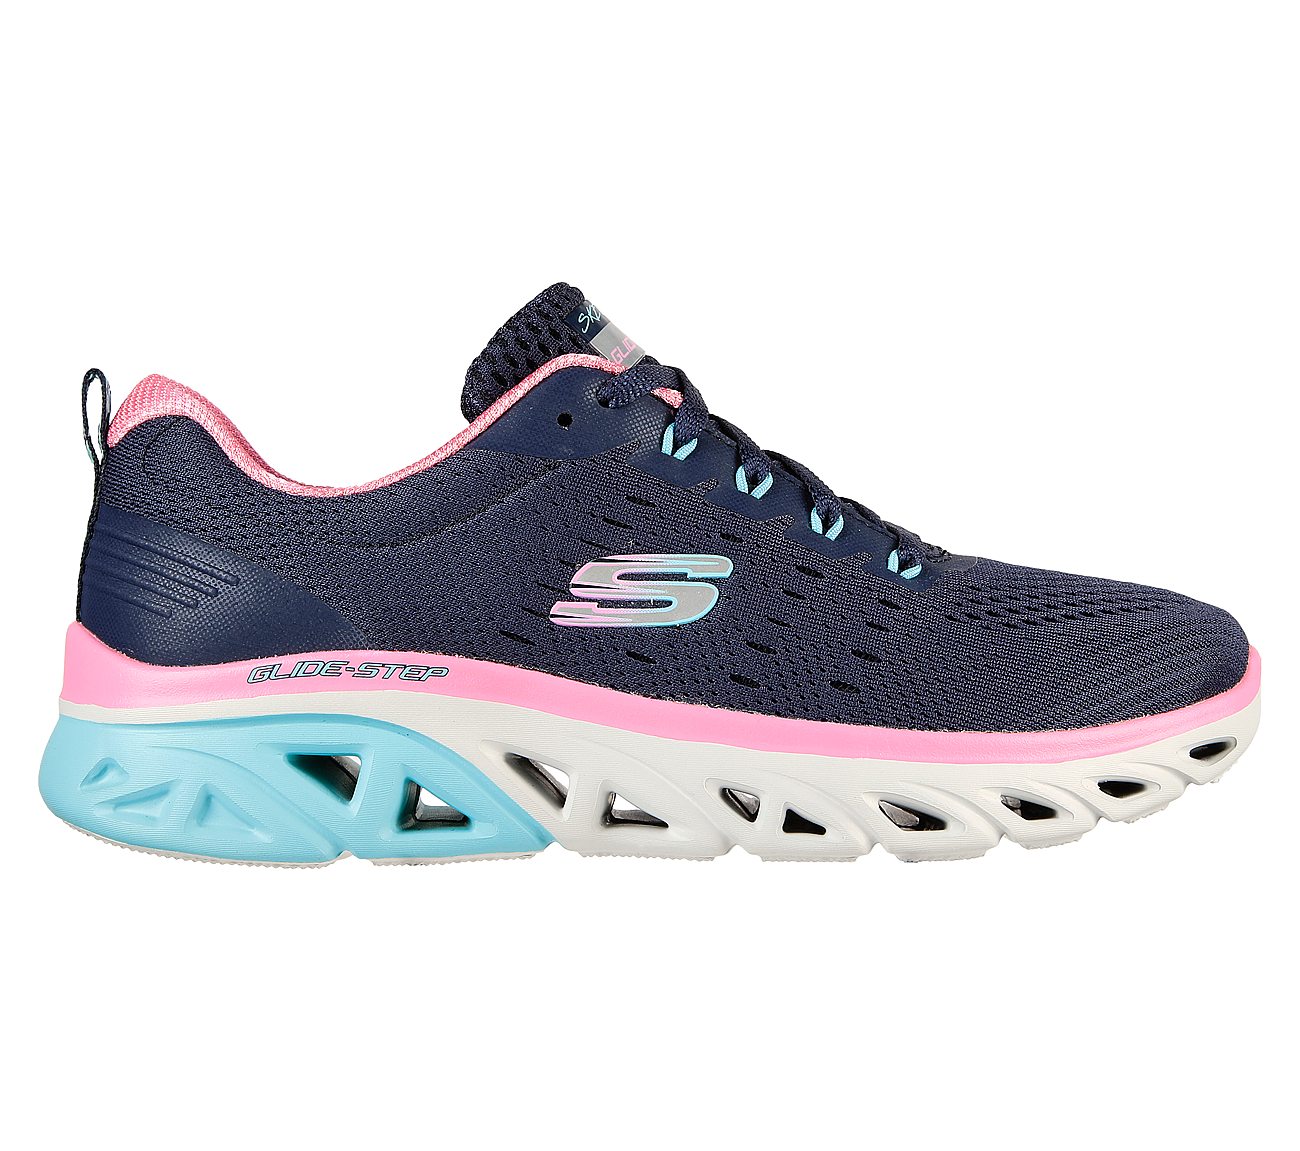 GLIDE-STEP SPORT-NEW APPEAL, NAVY/MULTI Footwear Lateral View